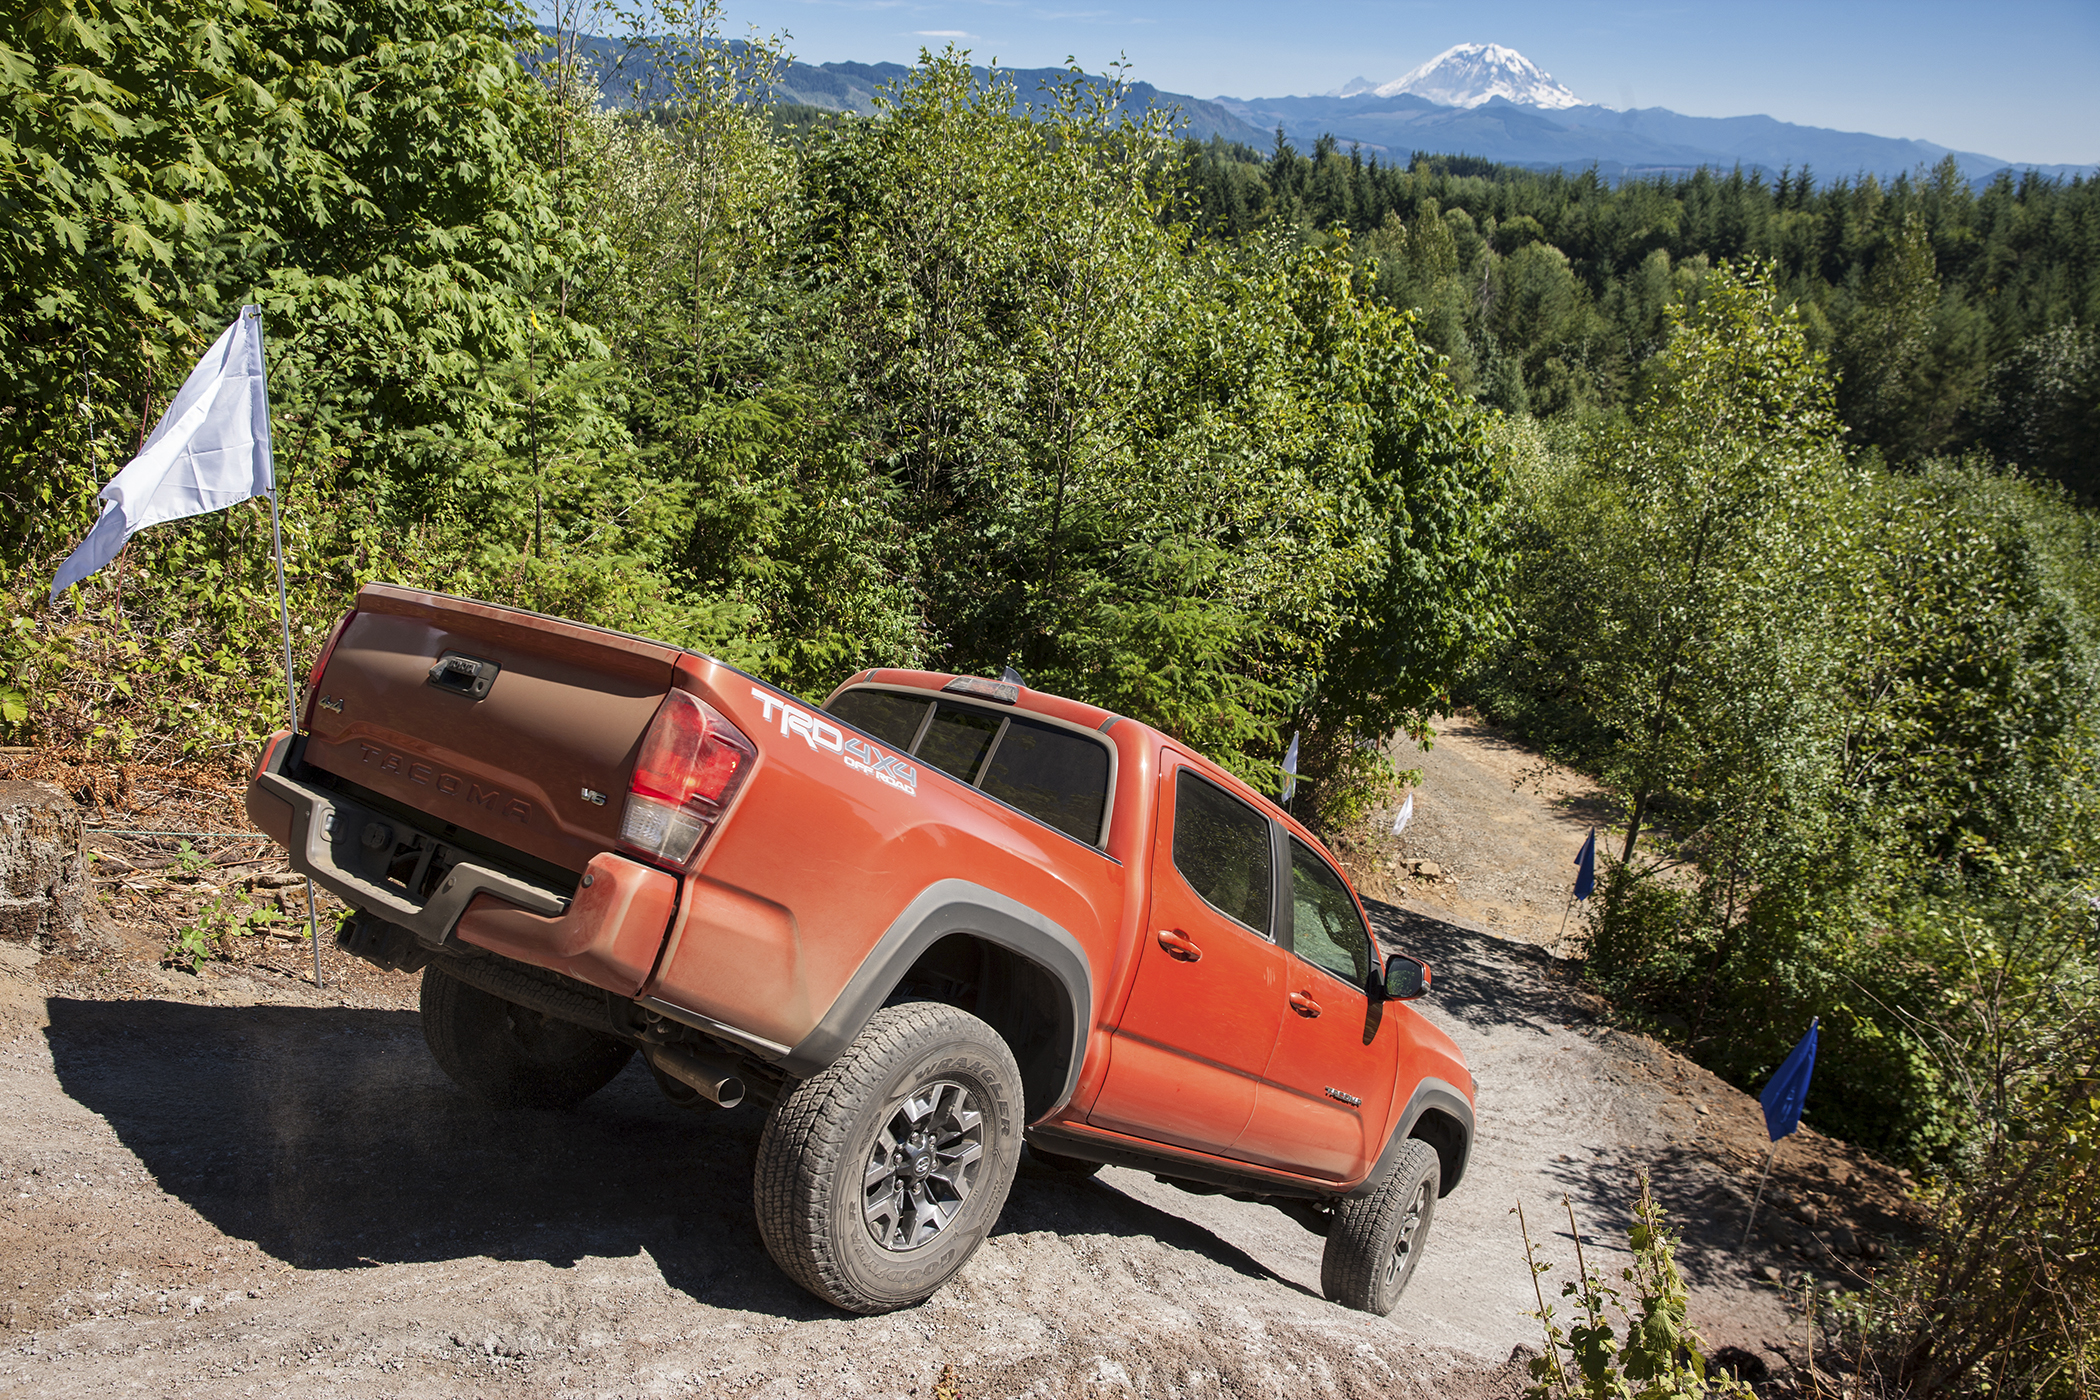 <strong>Best Compact Truck:</strong> Raise a glass for the <a href="http://www.edmunds.com/toyota/tacoma/2016/" target="_blank">Toyota Tacoma</a>, which was named the best compact truck for retained value all six years—it only loses 27% of its value over five years. Worth noting: the truck "often costs more than competing trucks and prices are high on the used market as well," according to Edmunds.